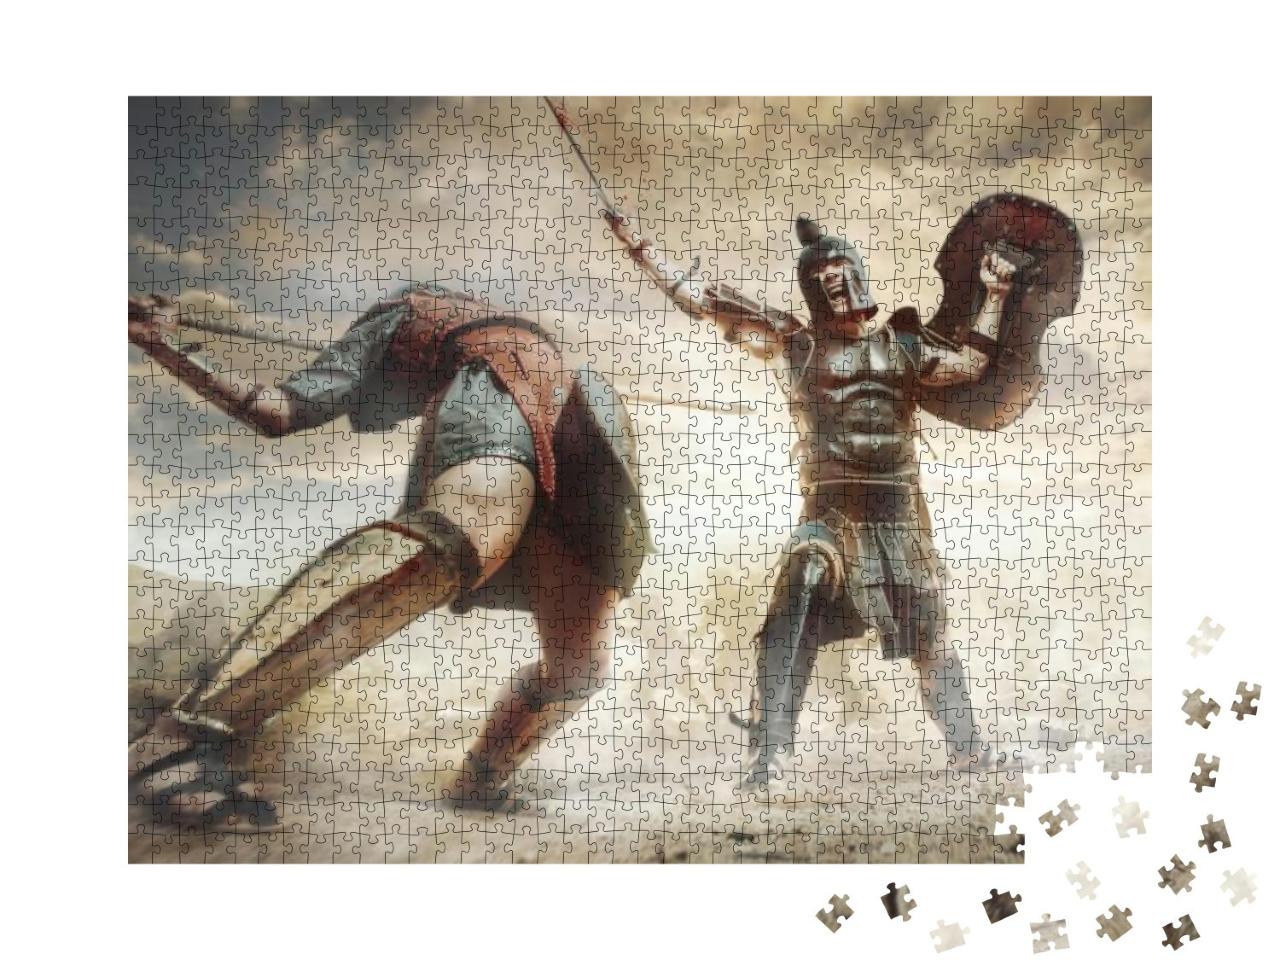 Ancient Greek Warrior Fighting in the Combat... Jigsaw Puzzle with 1000 pieces